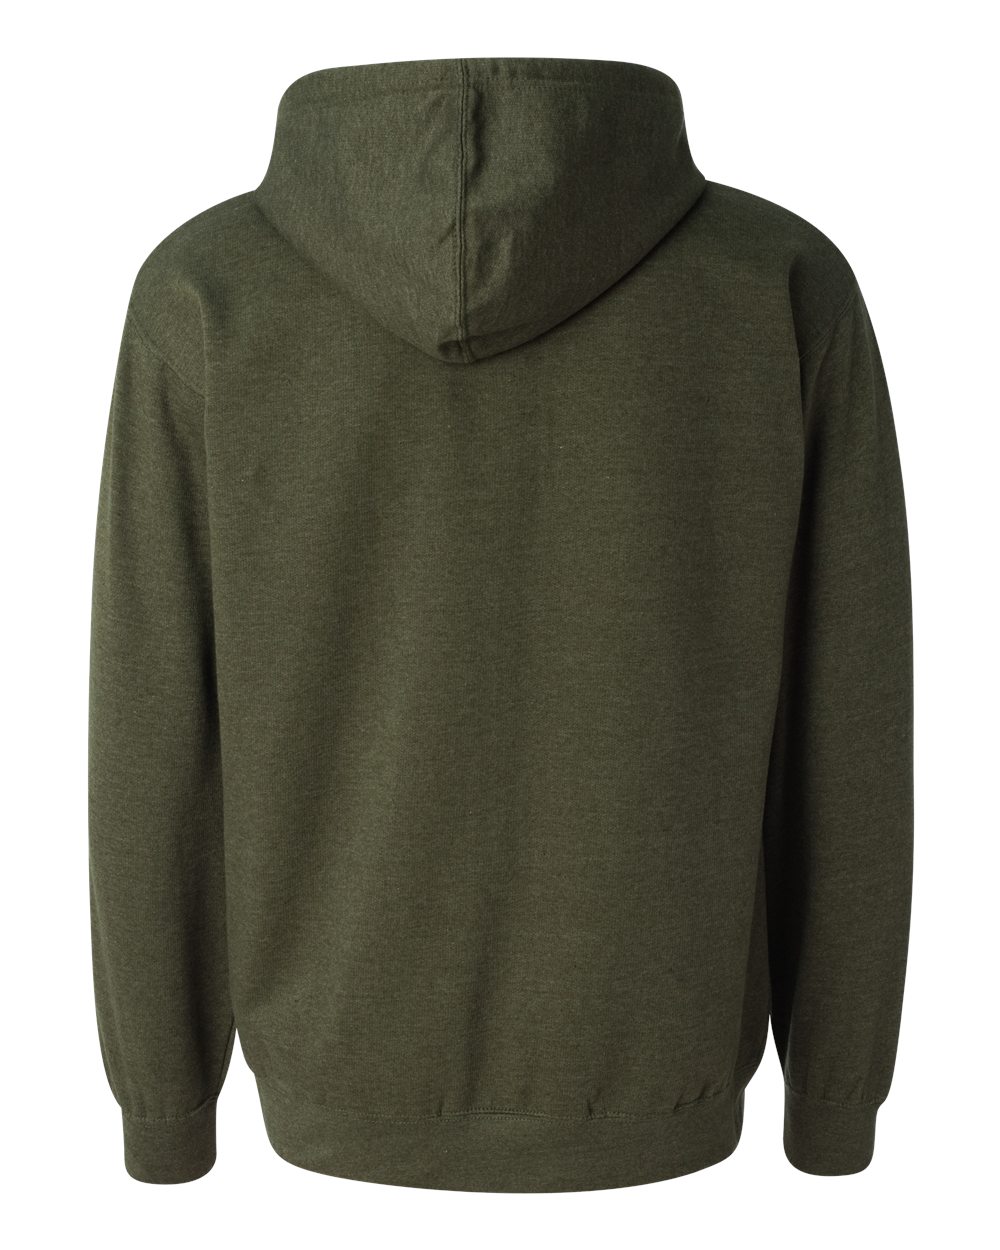 Independent Trading Co. SS4500  Midweight Hooded Sweatshirt